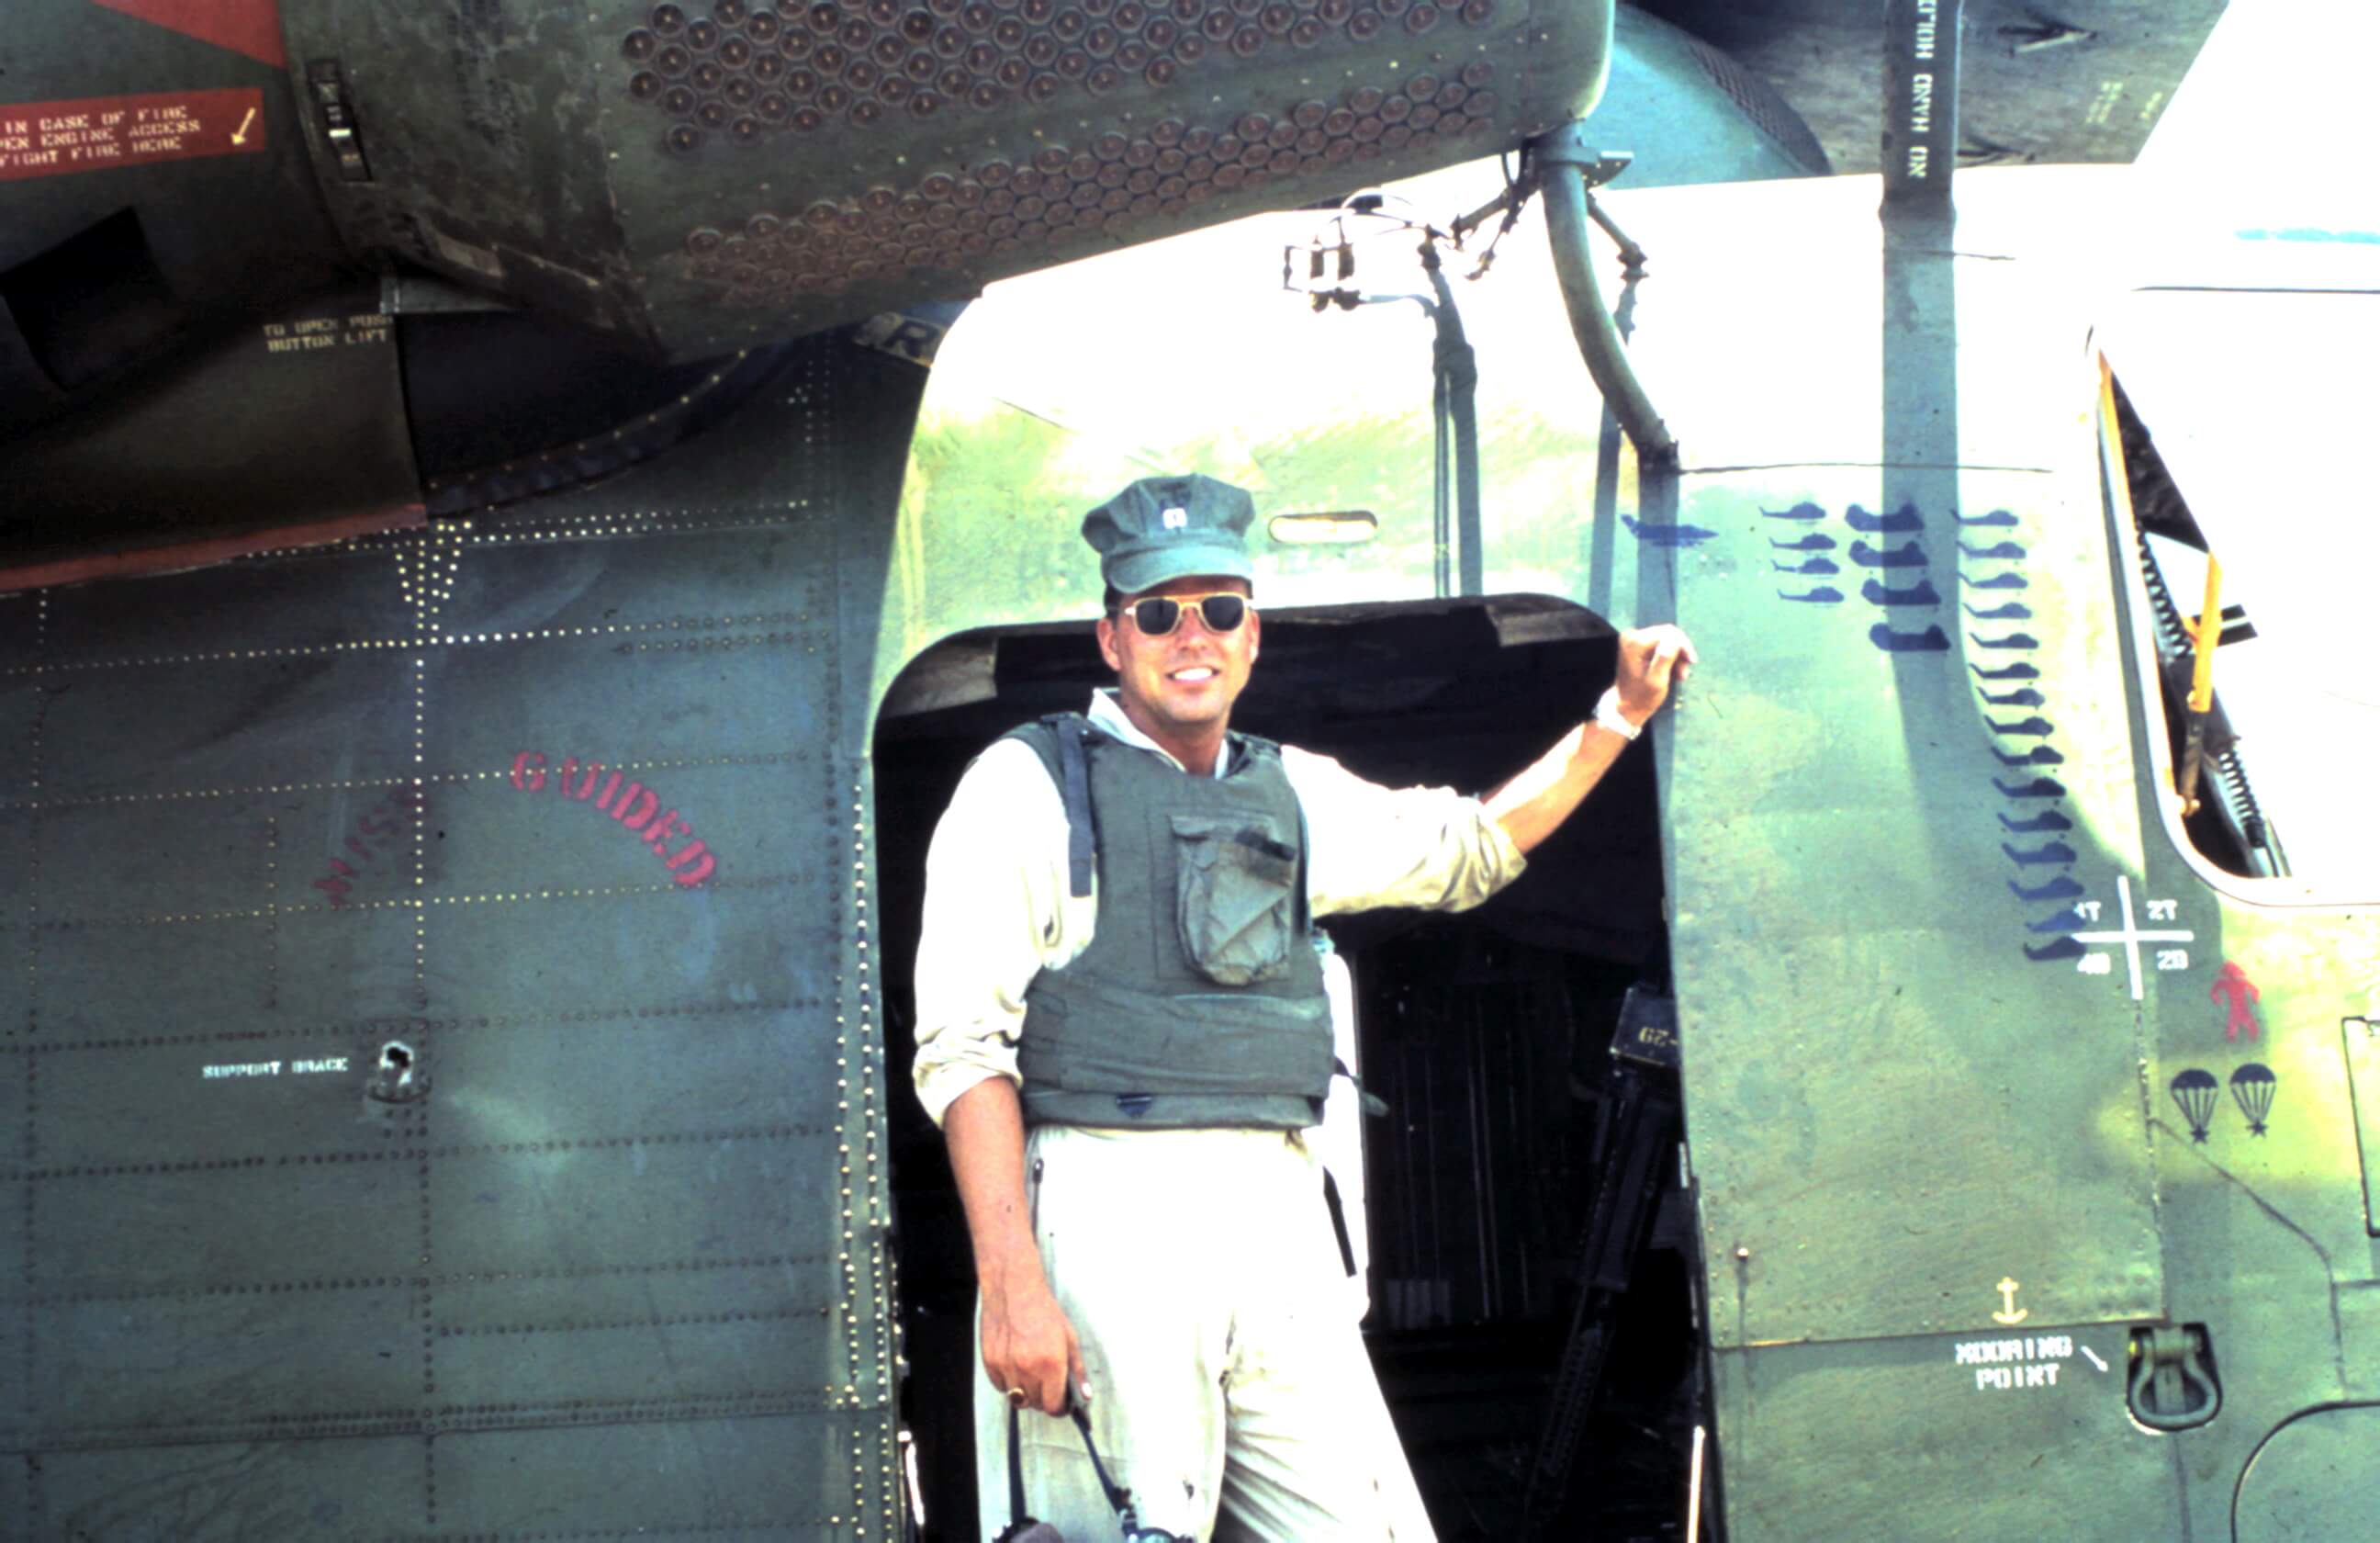 Pilot in front of a helicopter.